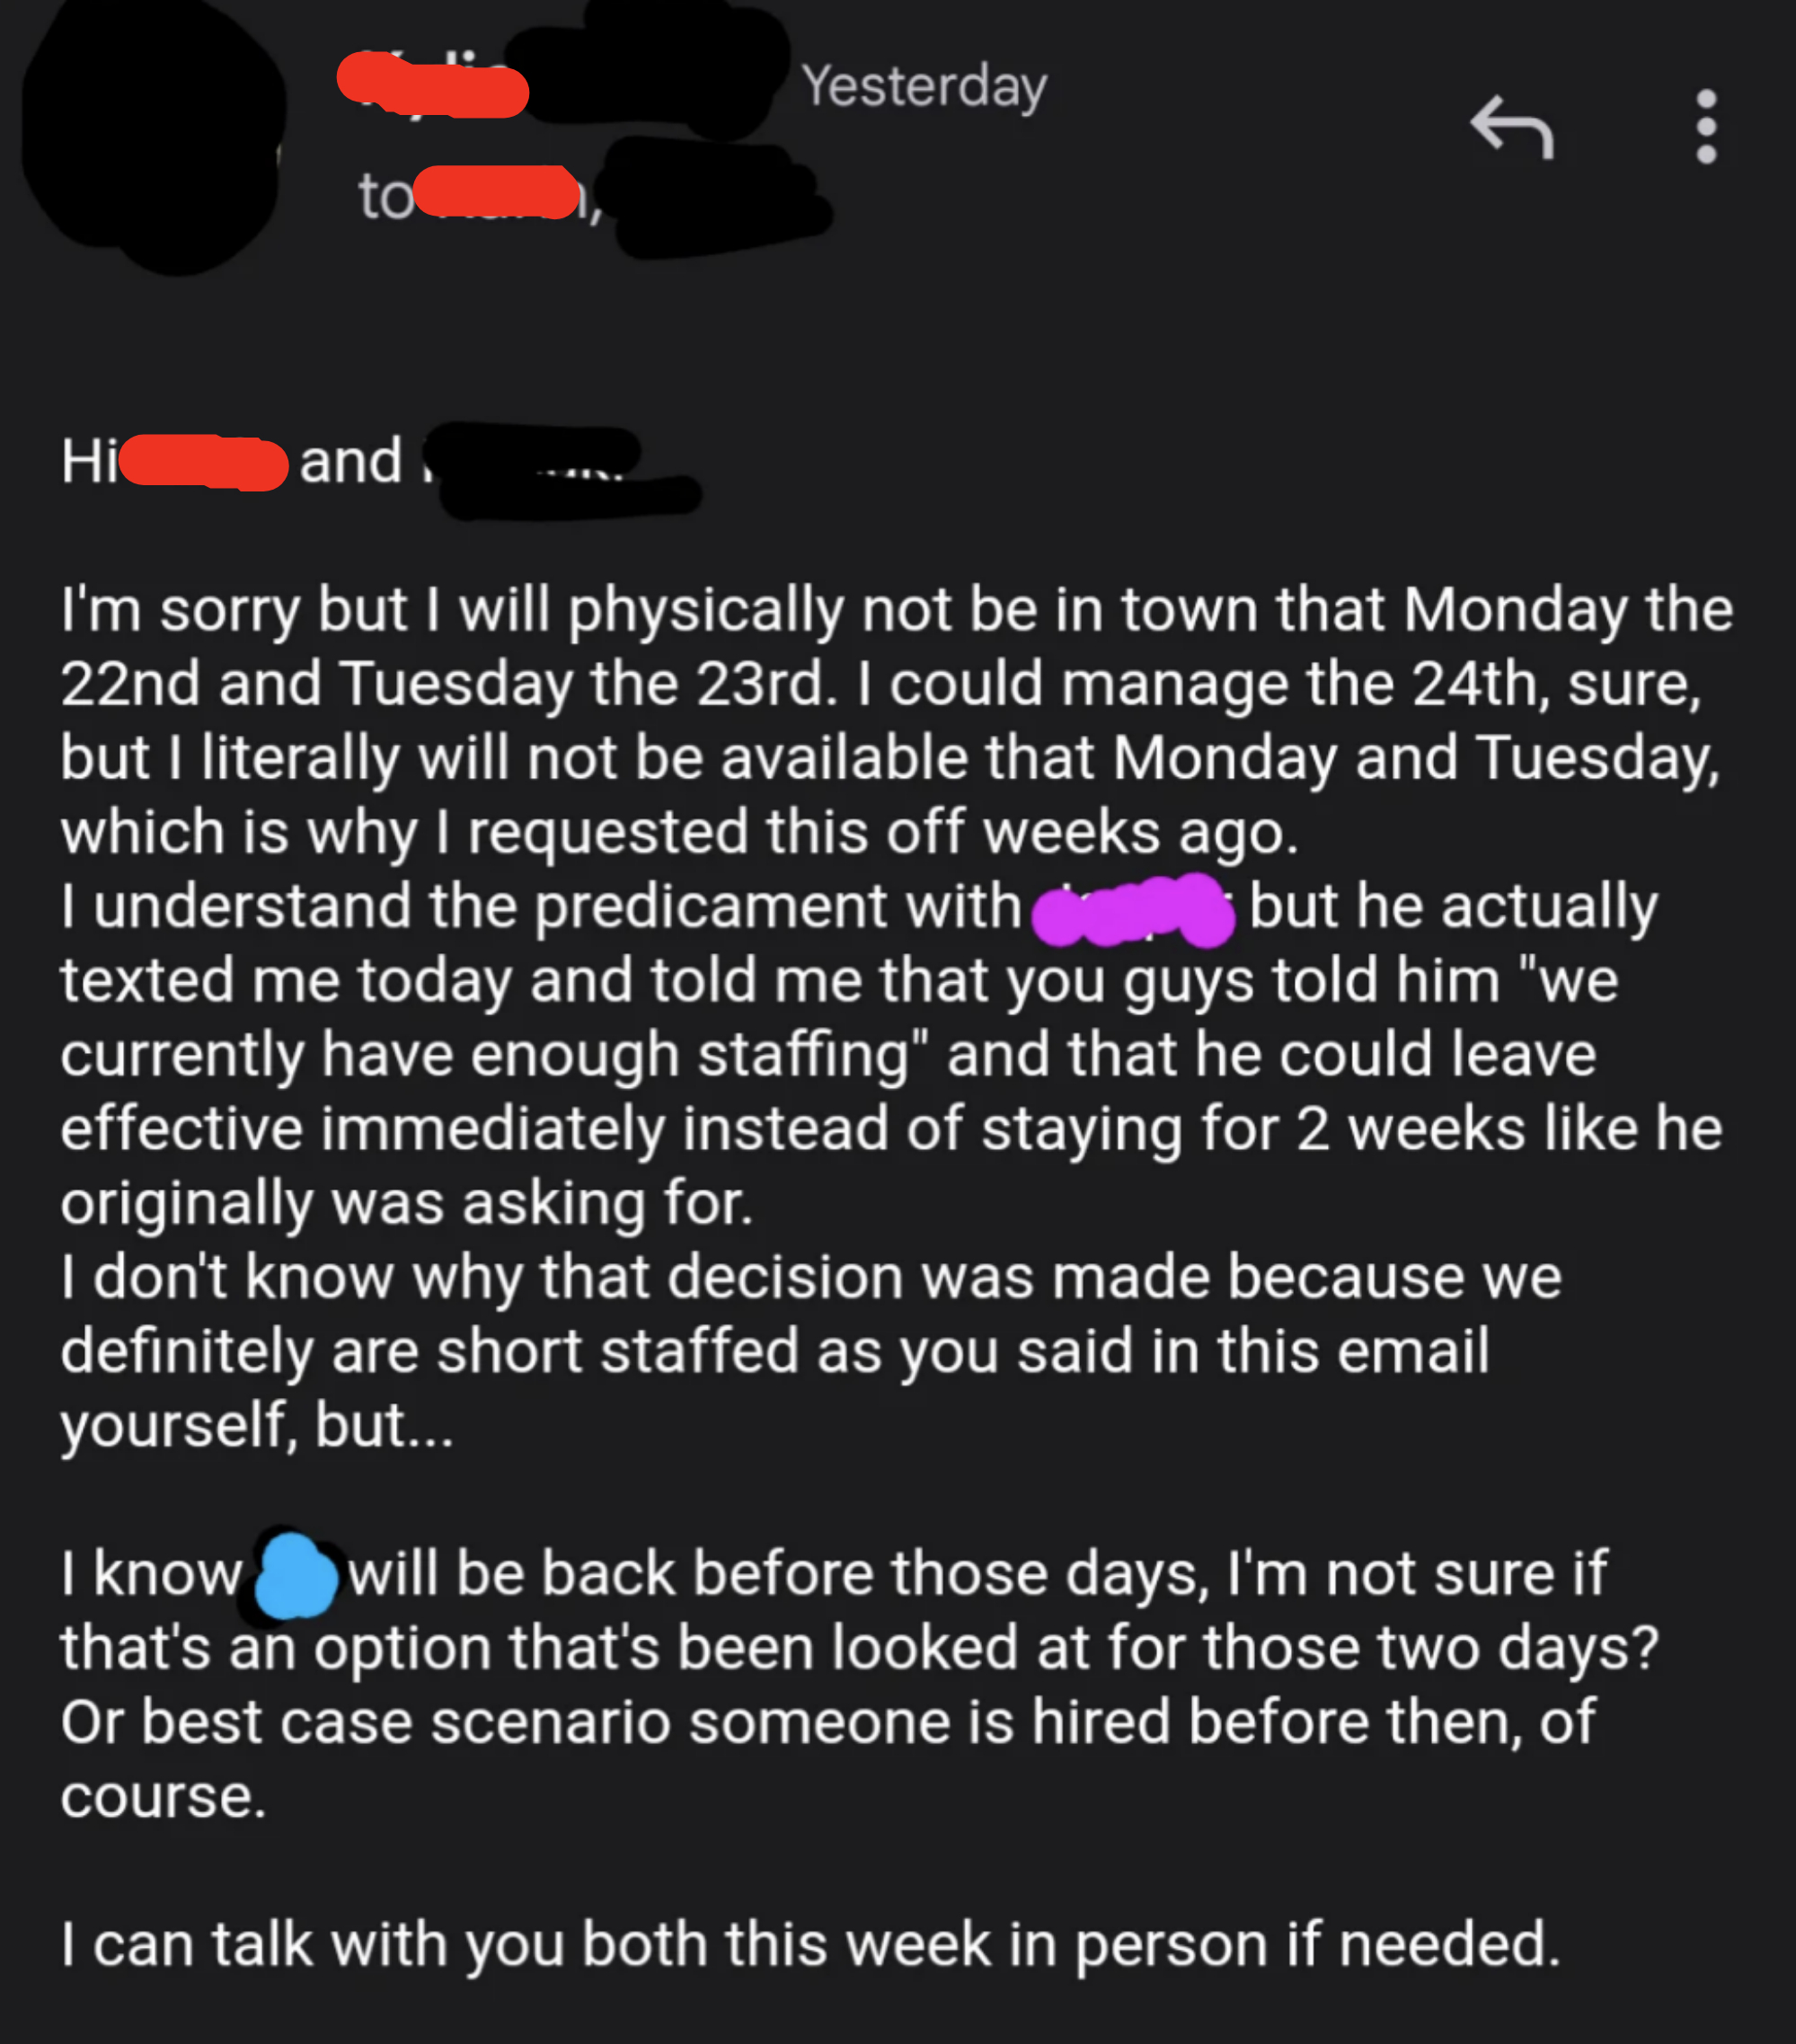 Boss refusing employee&#x27;s time-off request